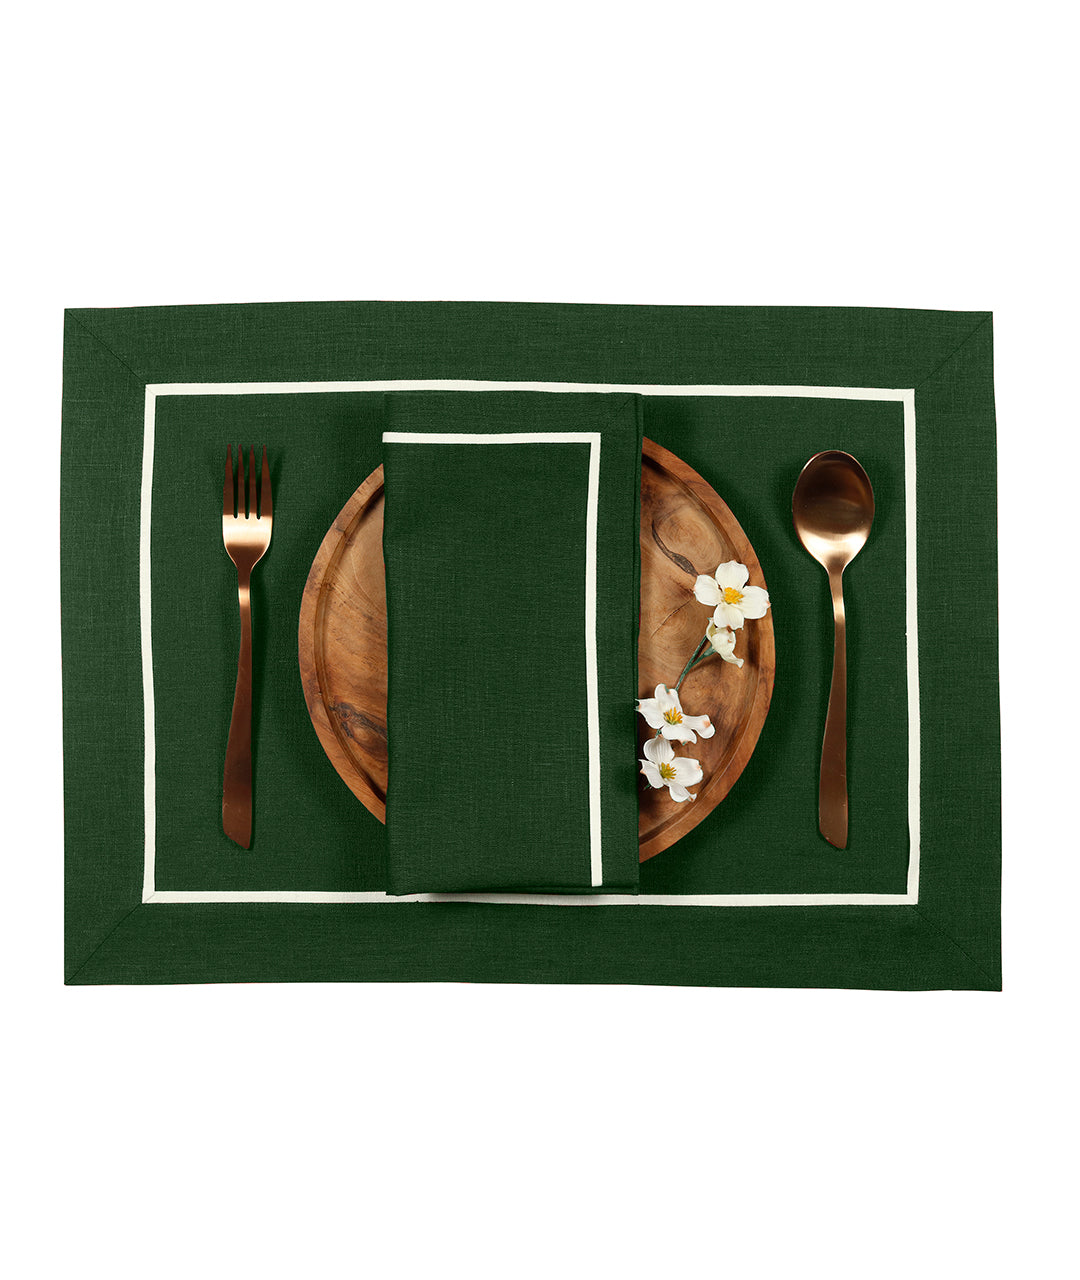 Eden Green & White Linen Placemats 14 x 19 Inch Set of 4 - Reversible